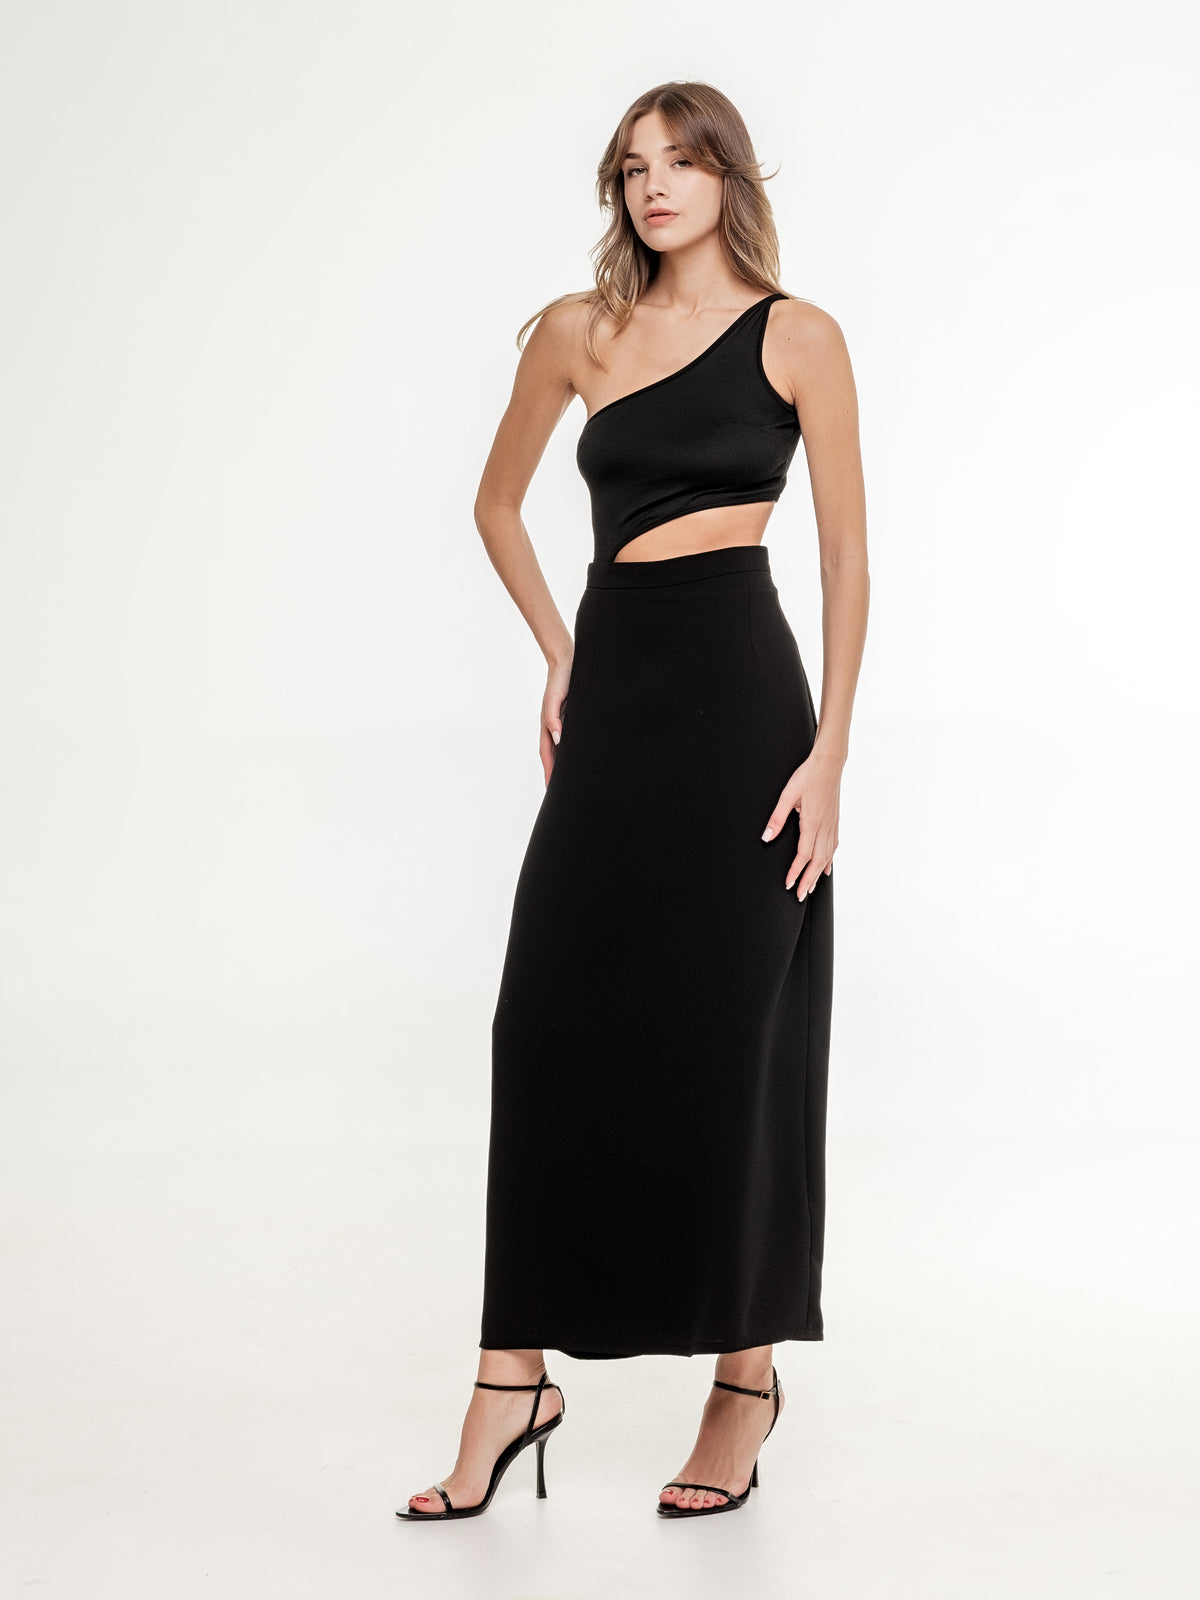 long black skirt A shaped side view